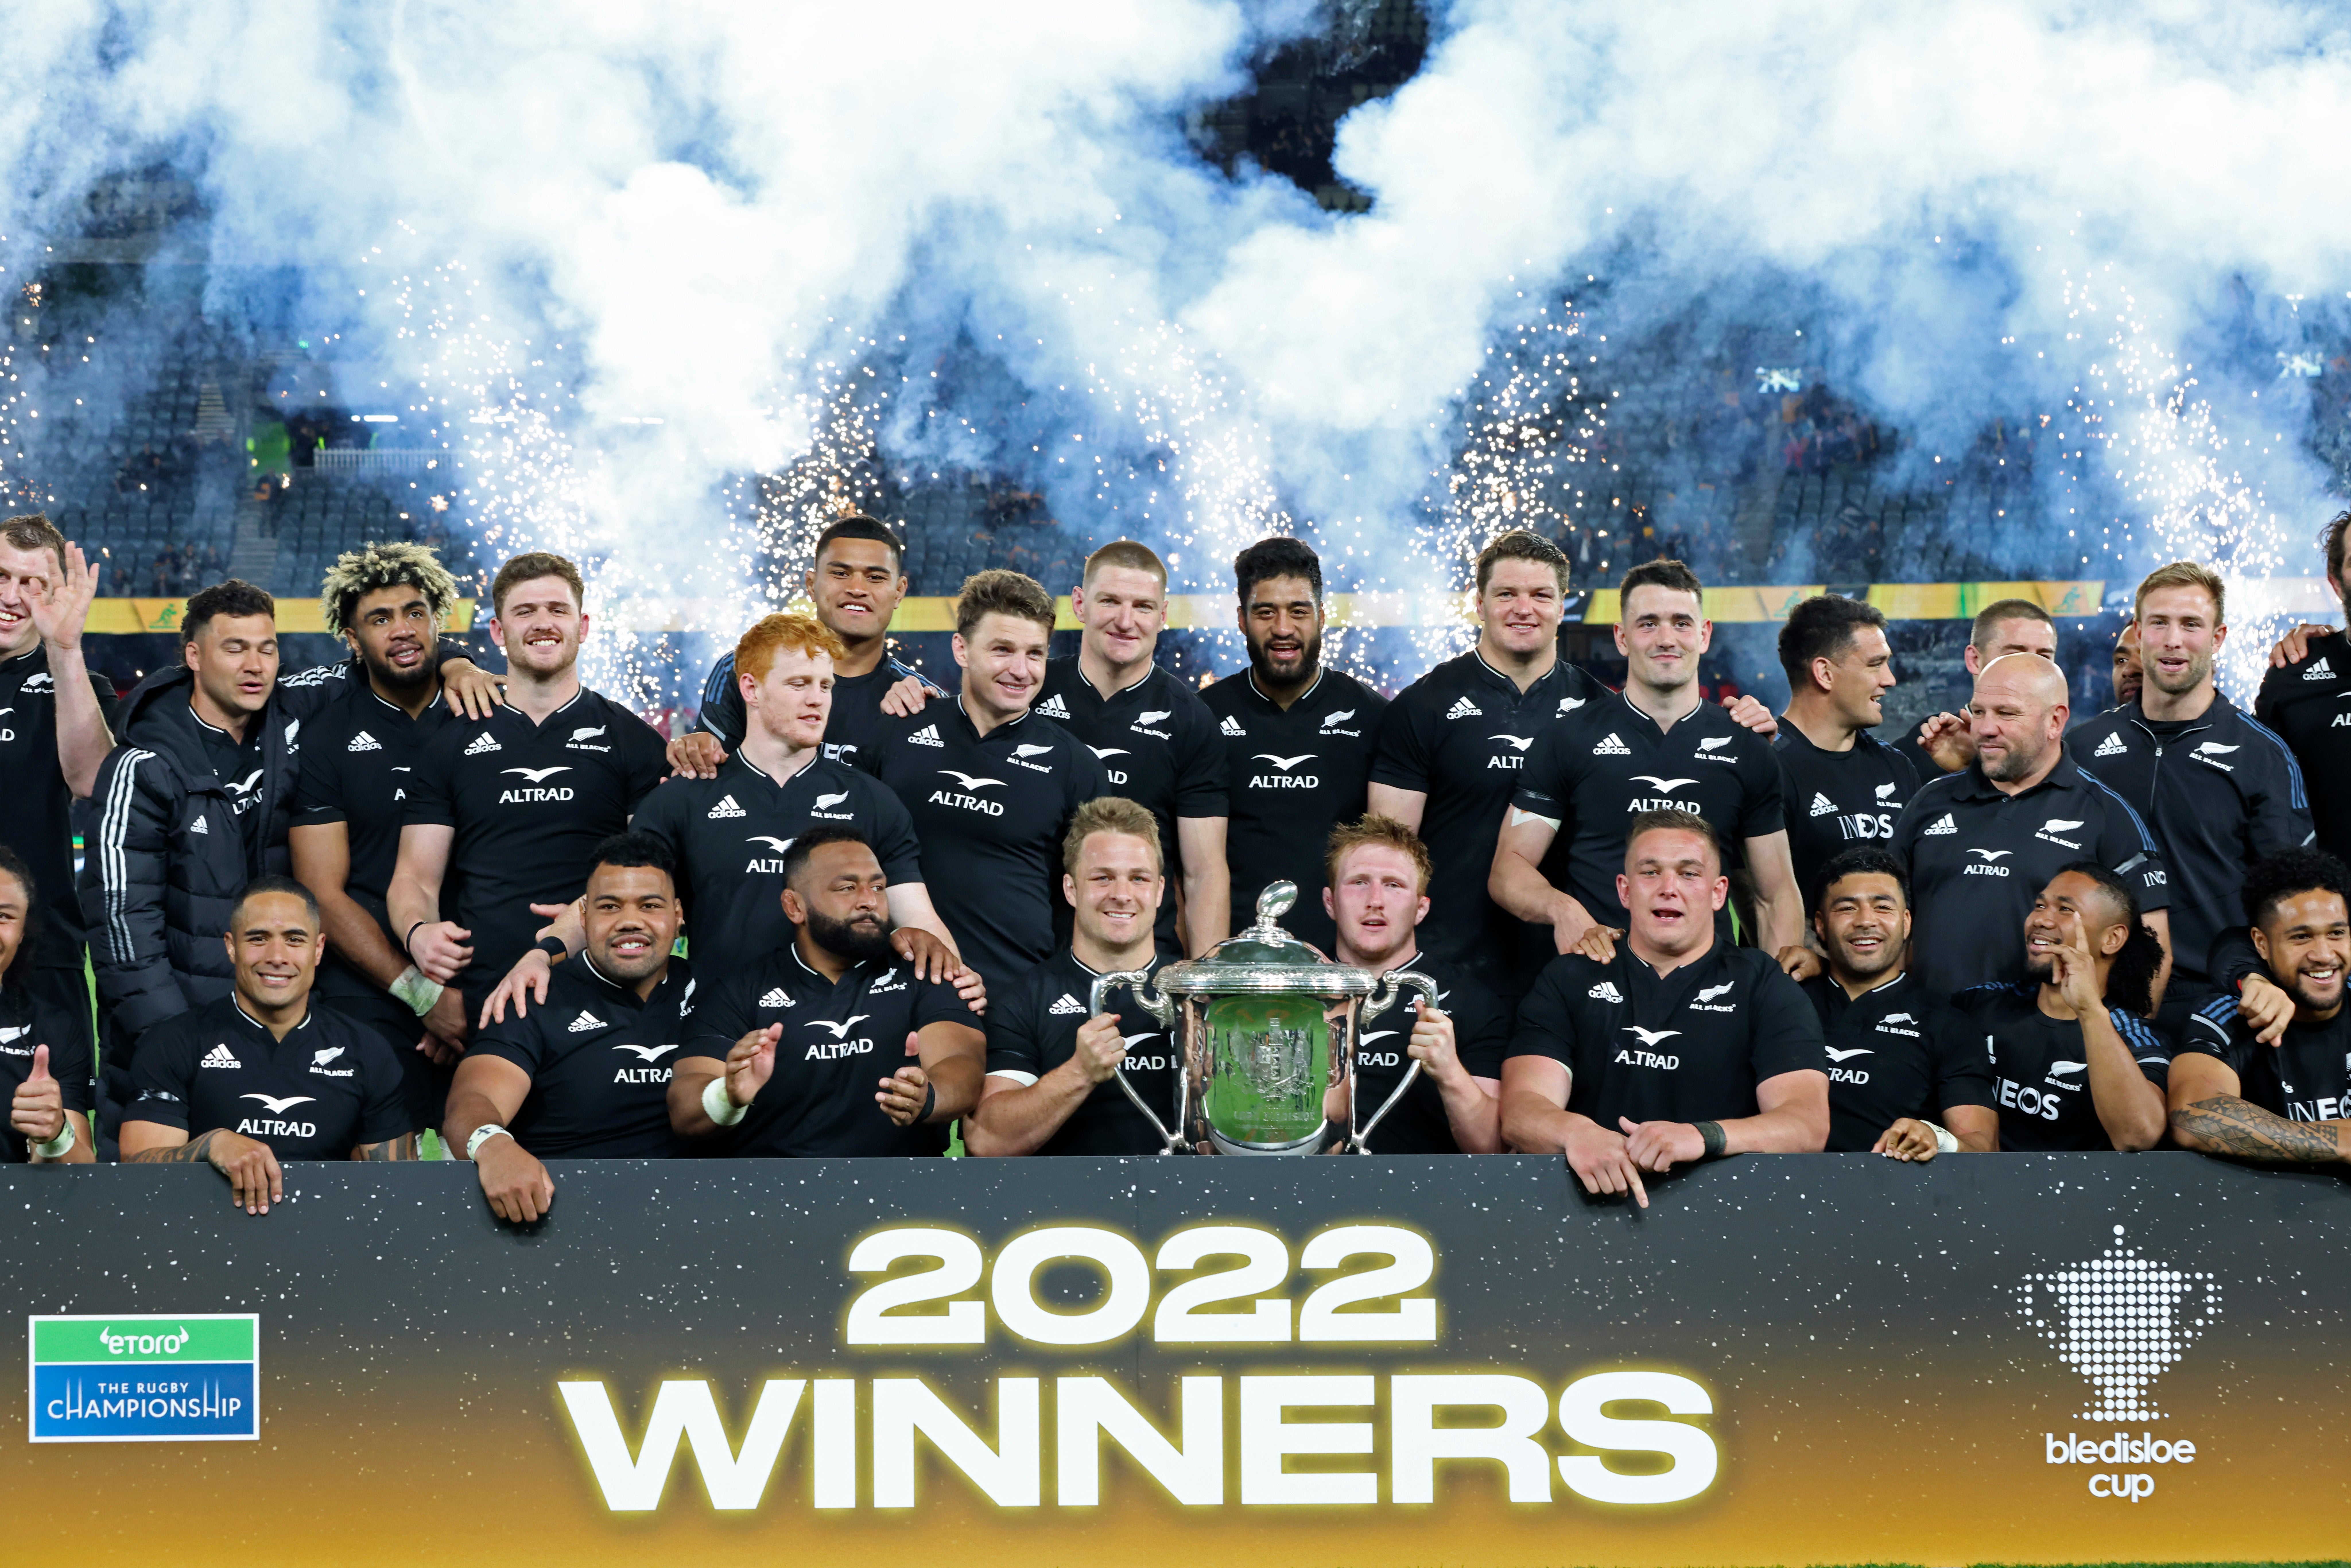 The All Blacks won the Bledisloe Cup for the 20th consecutive year